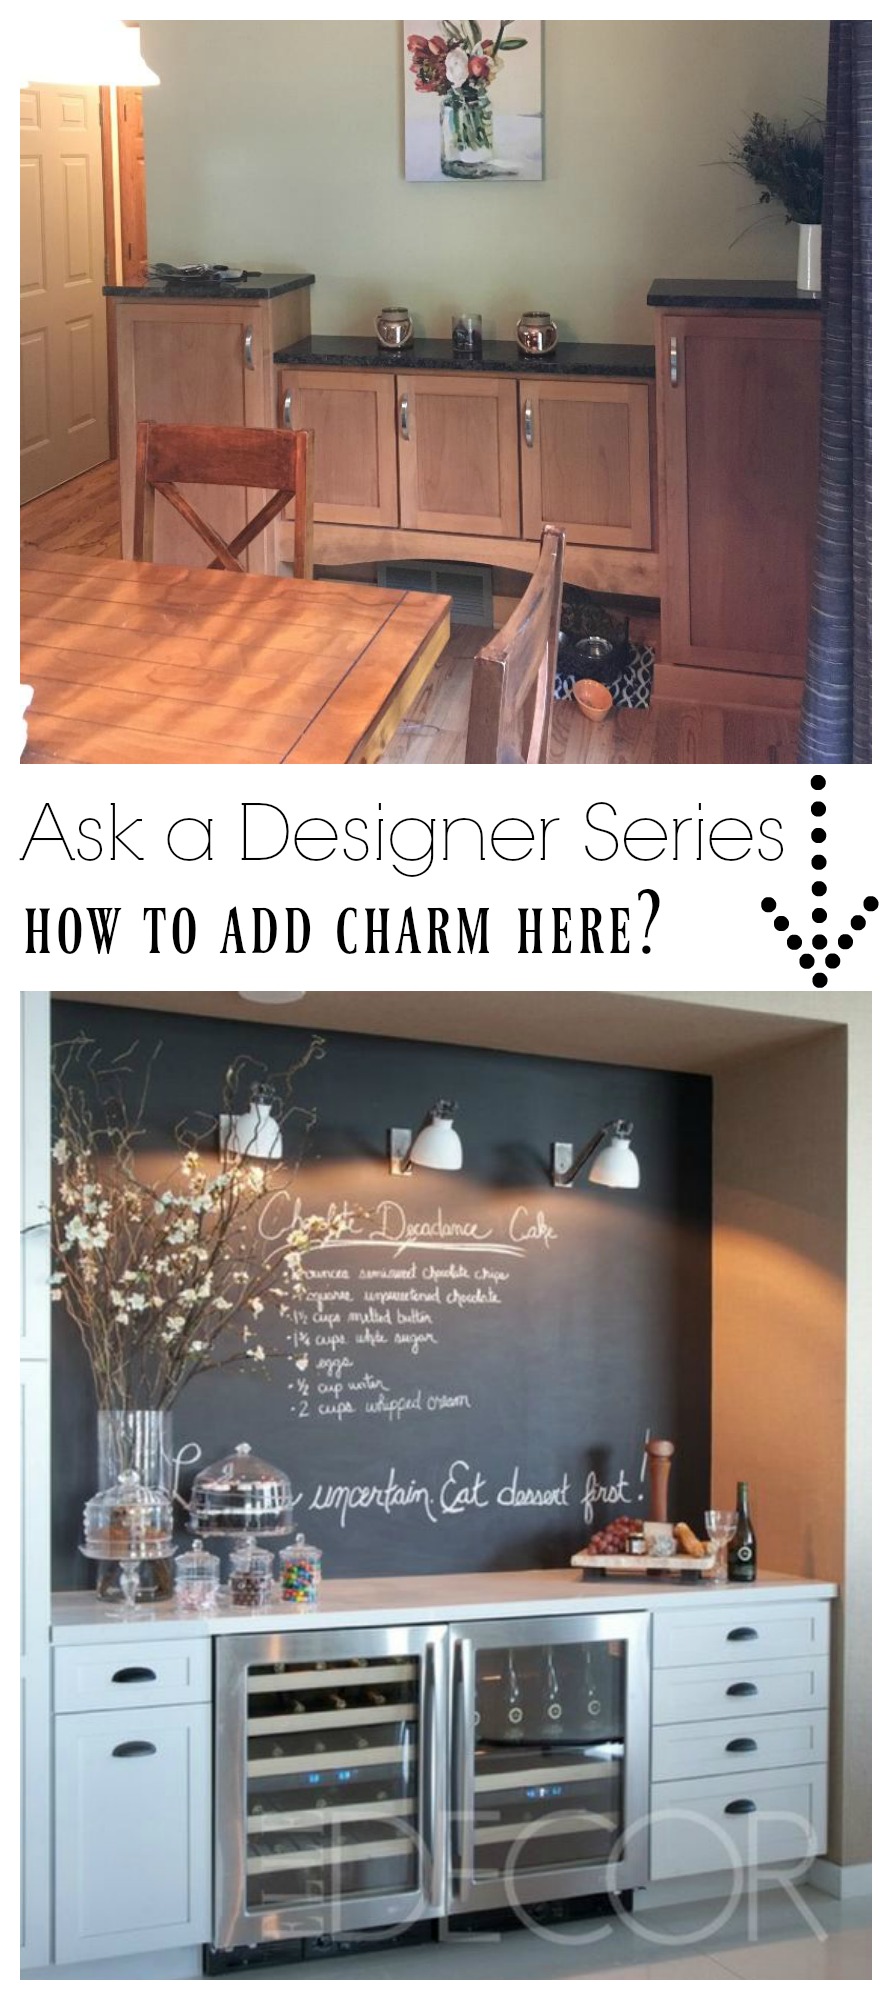 Ask a Designer Series- How to add charm to dining space?